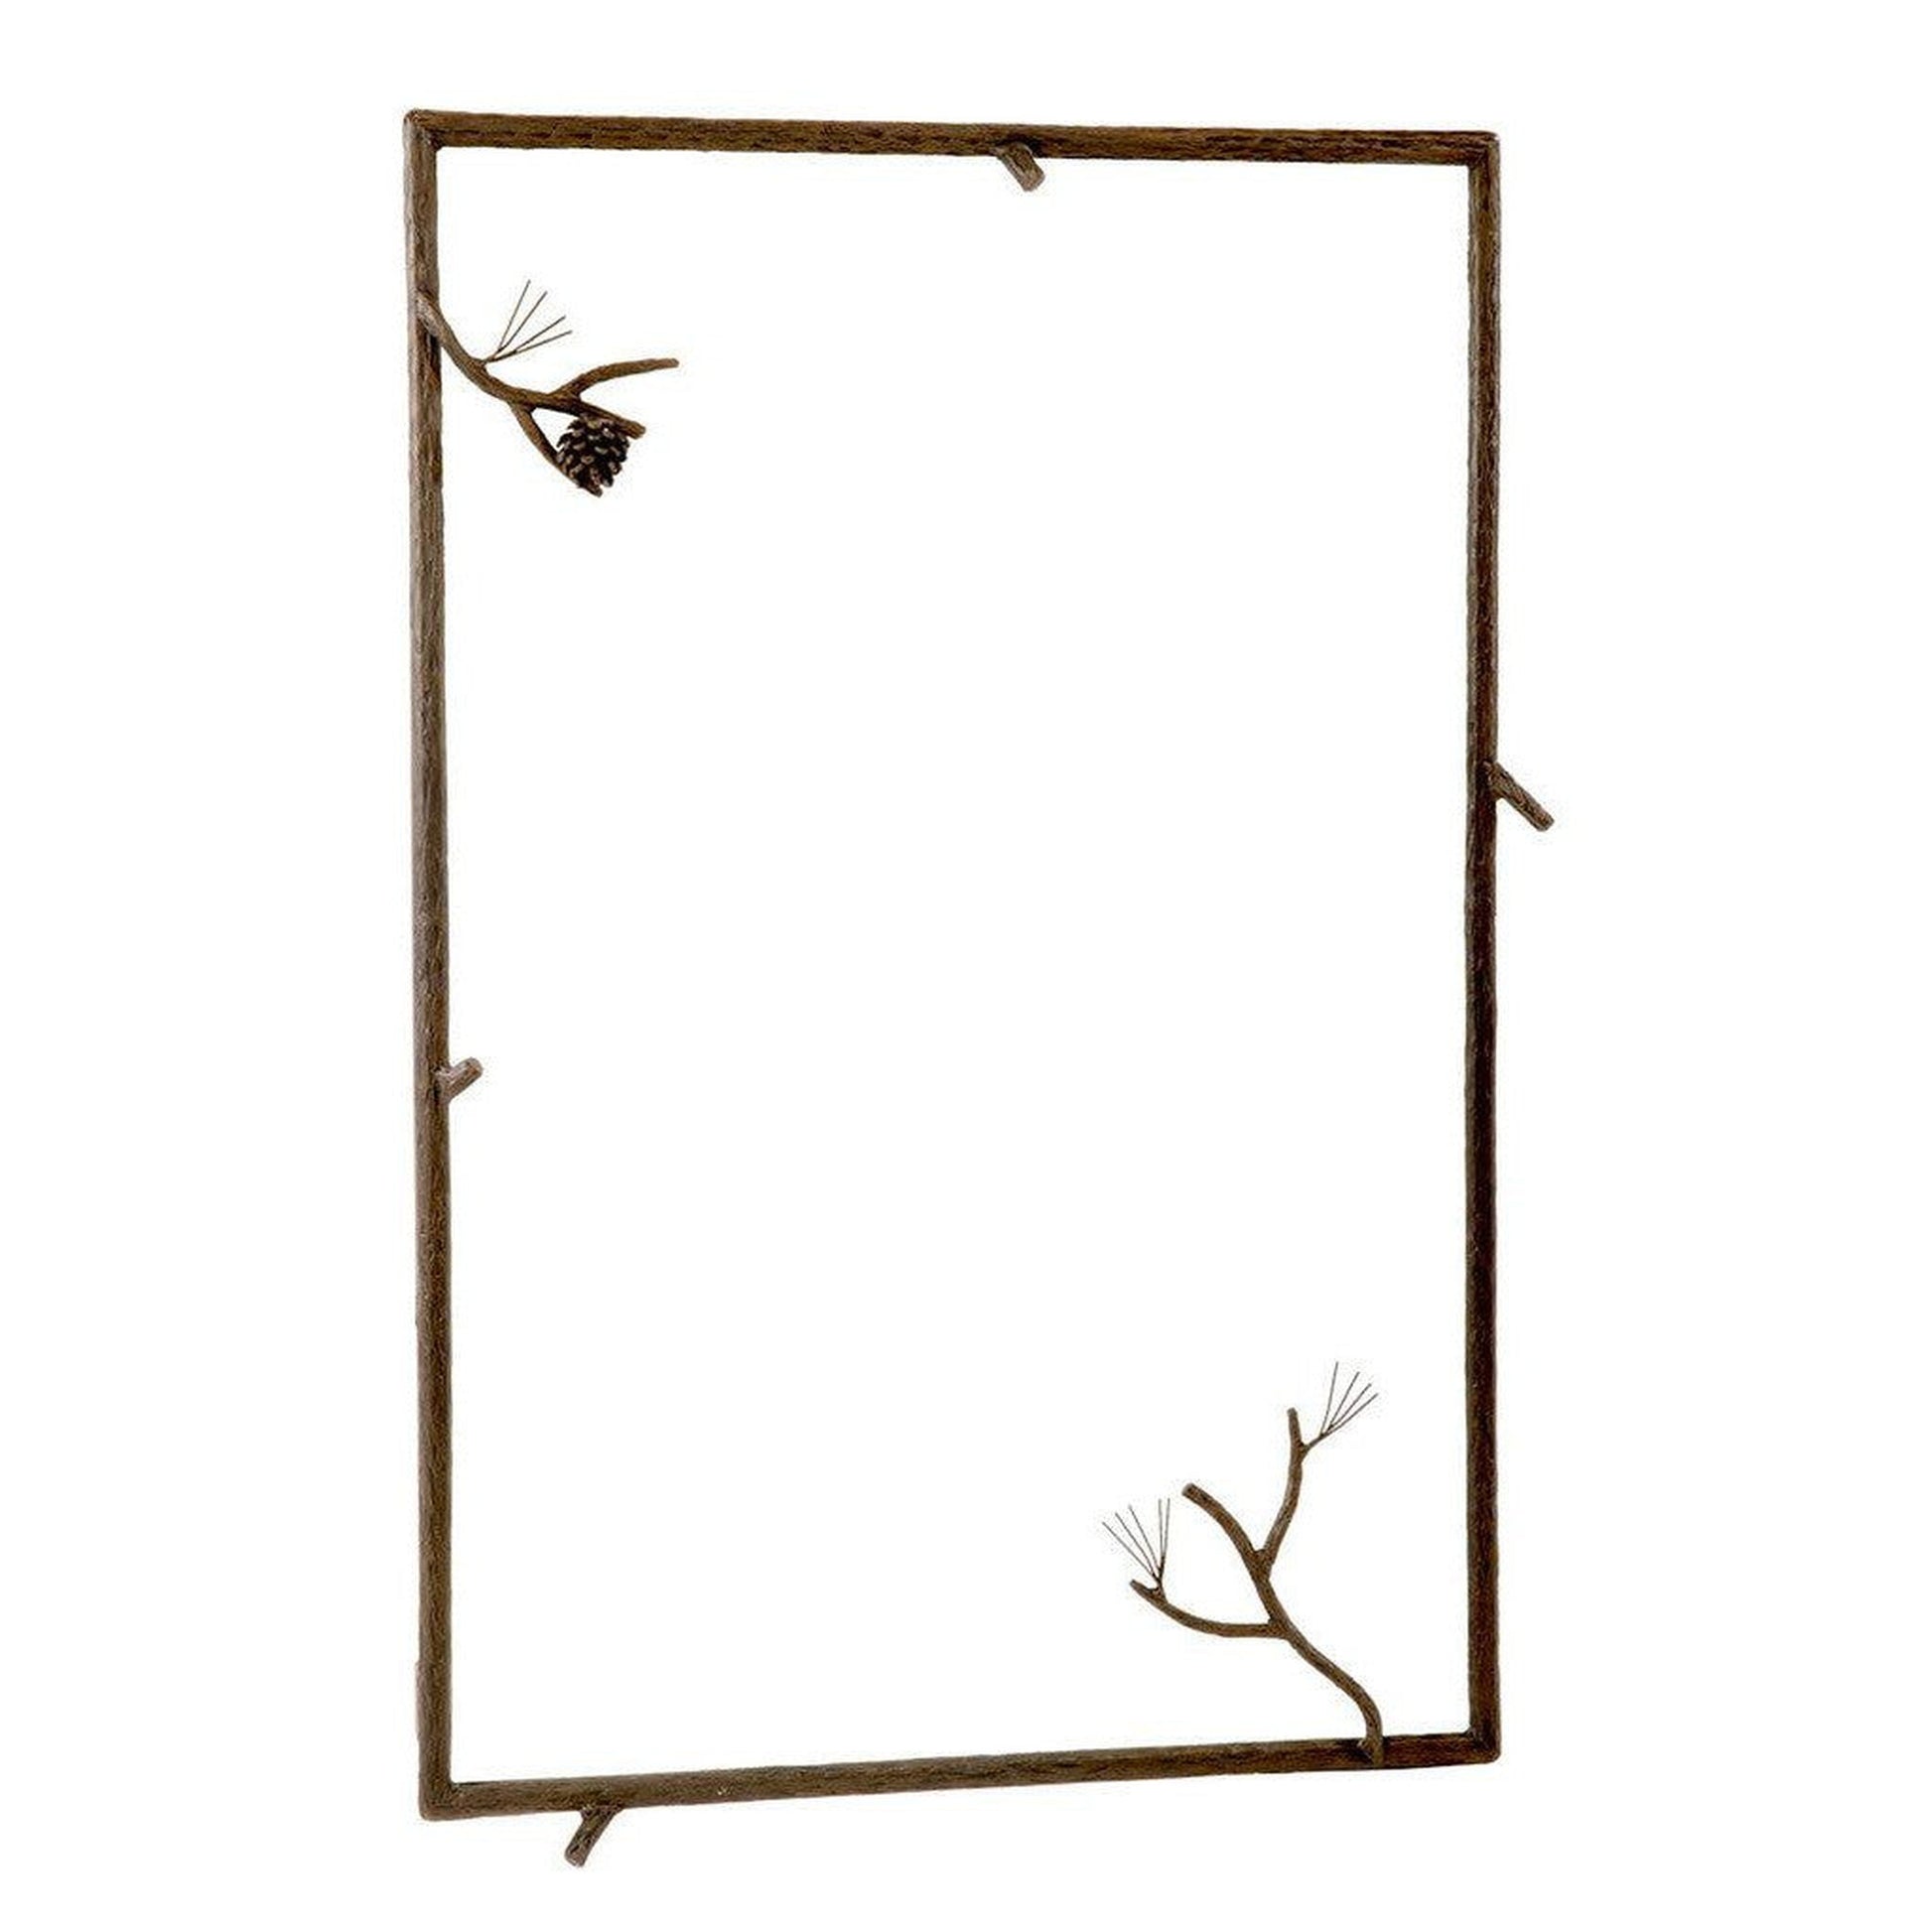 Stone County Ironworks Pine 37" x 25" Large Natural Black Iron Wall Mirror With Gold Iron Accent